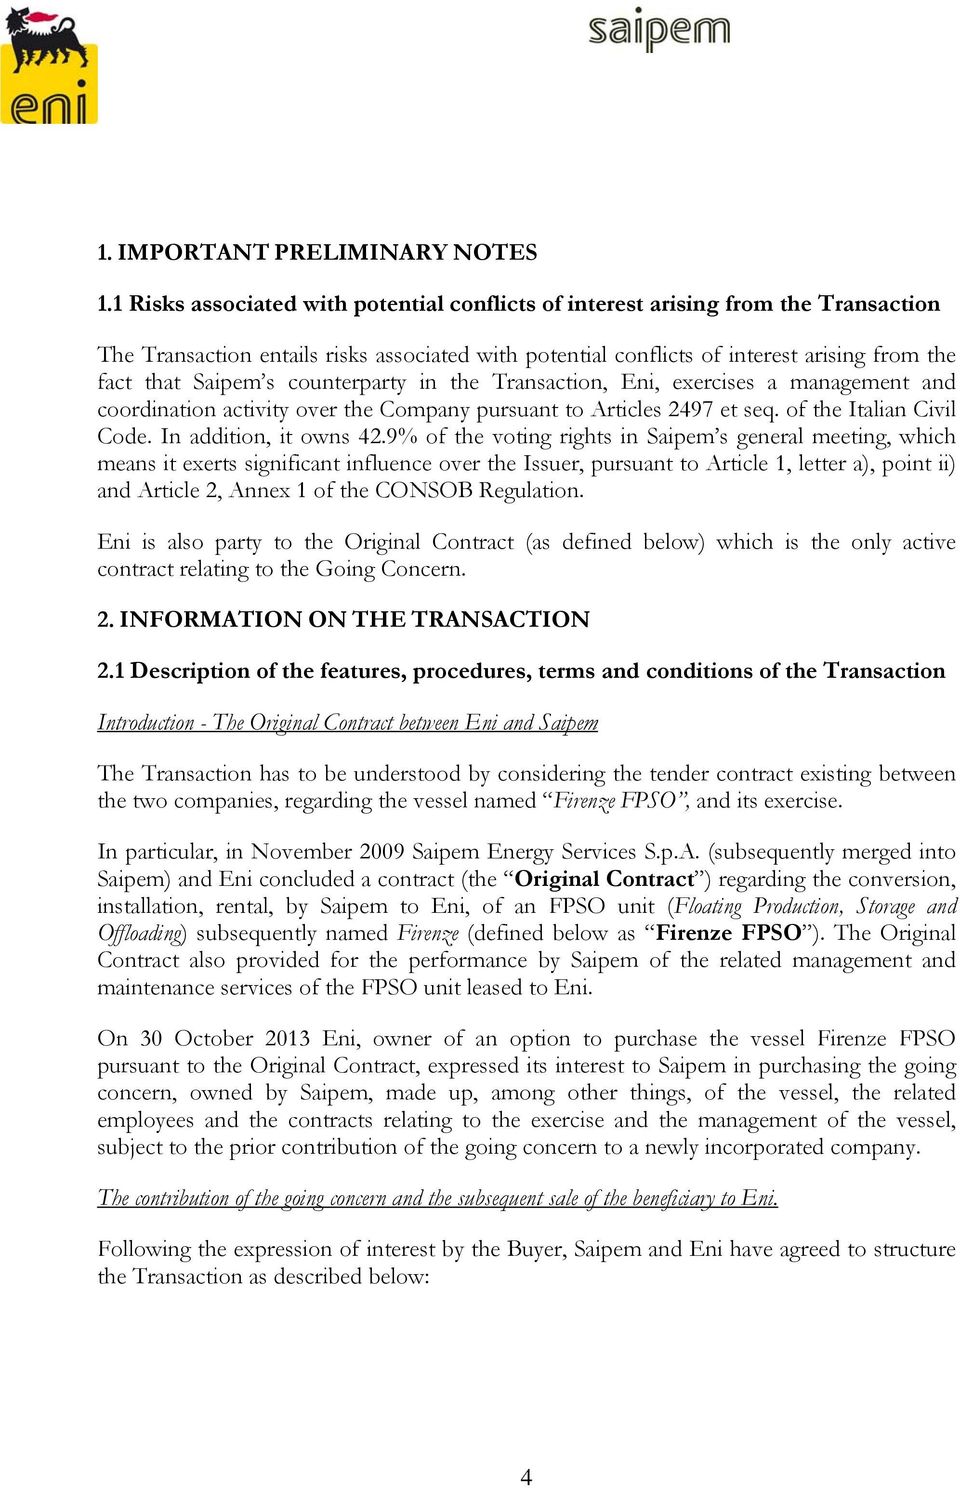 counterparty in the Transaction, Eni, exercises a management and coordination activity over the Company pursuant to Articles 2497 et seq. of the Italian Civil Code. In addition, it owns 42.